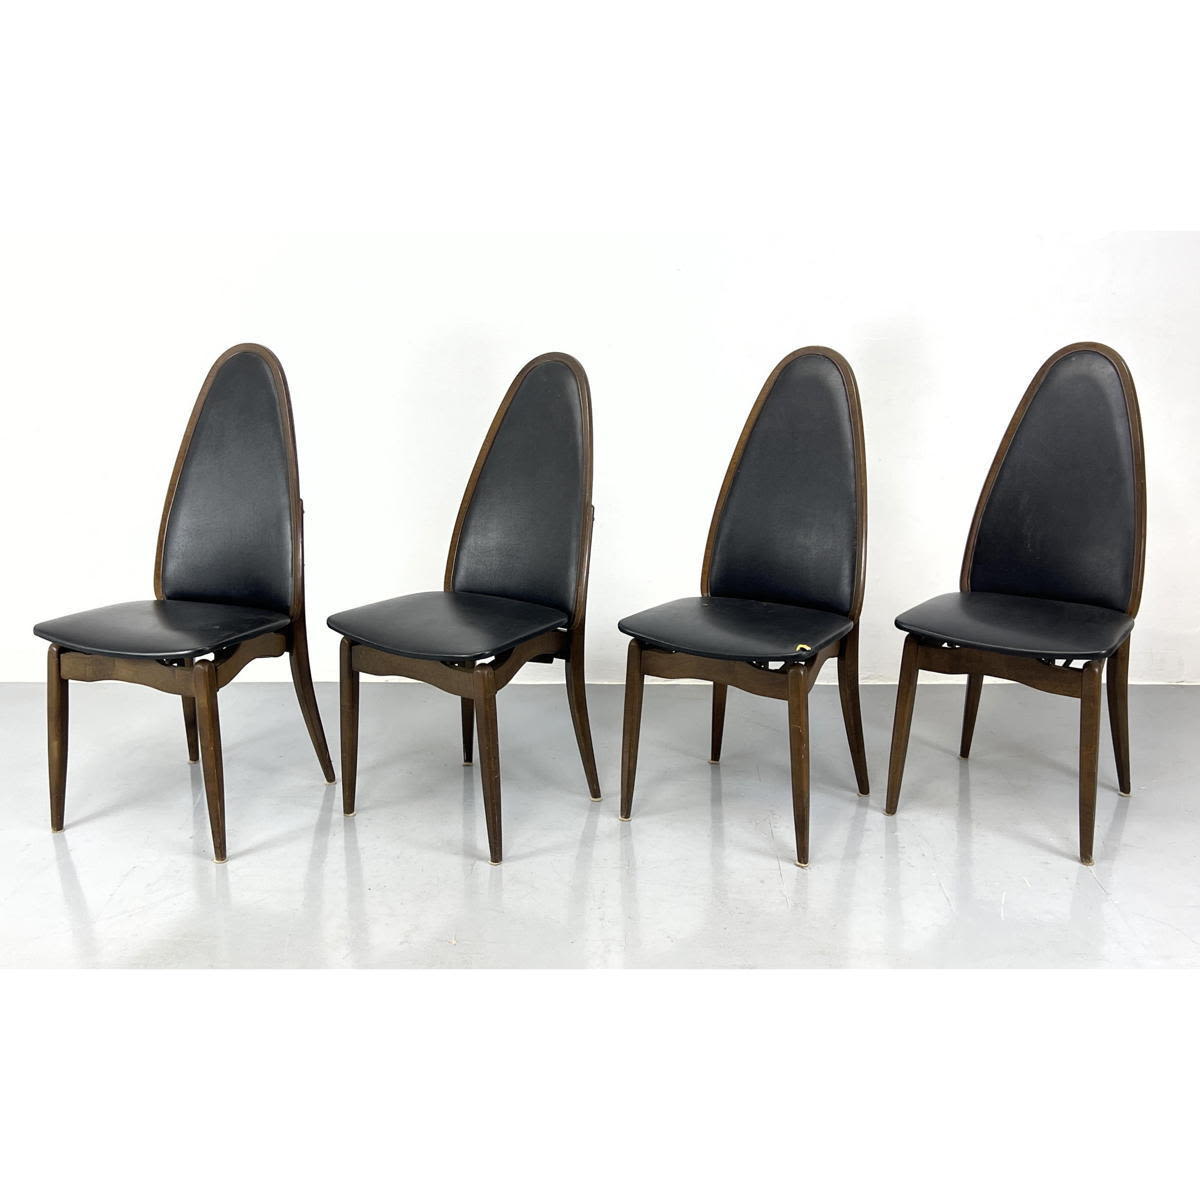 Set 4 STAKMORE Folding Chairs.